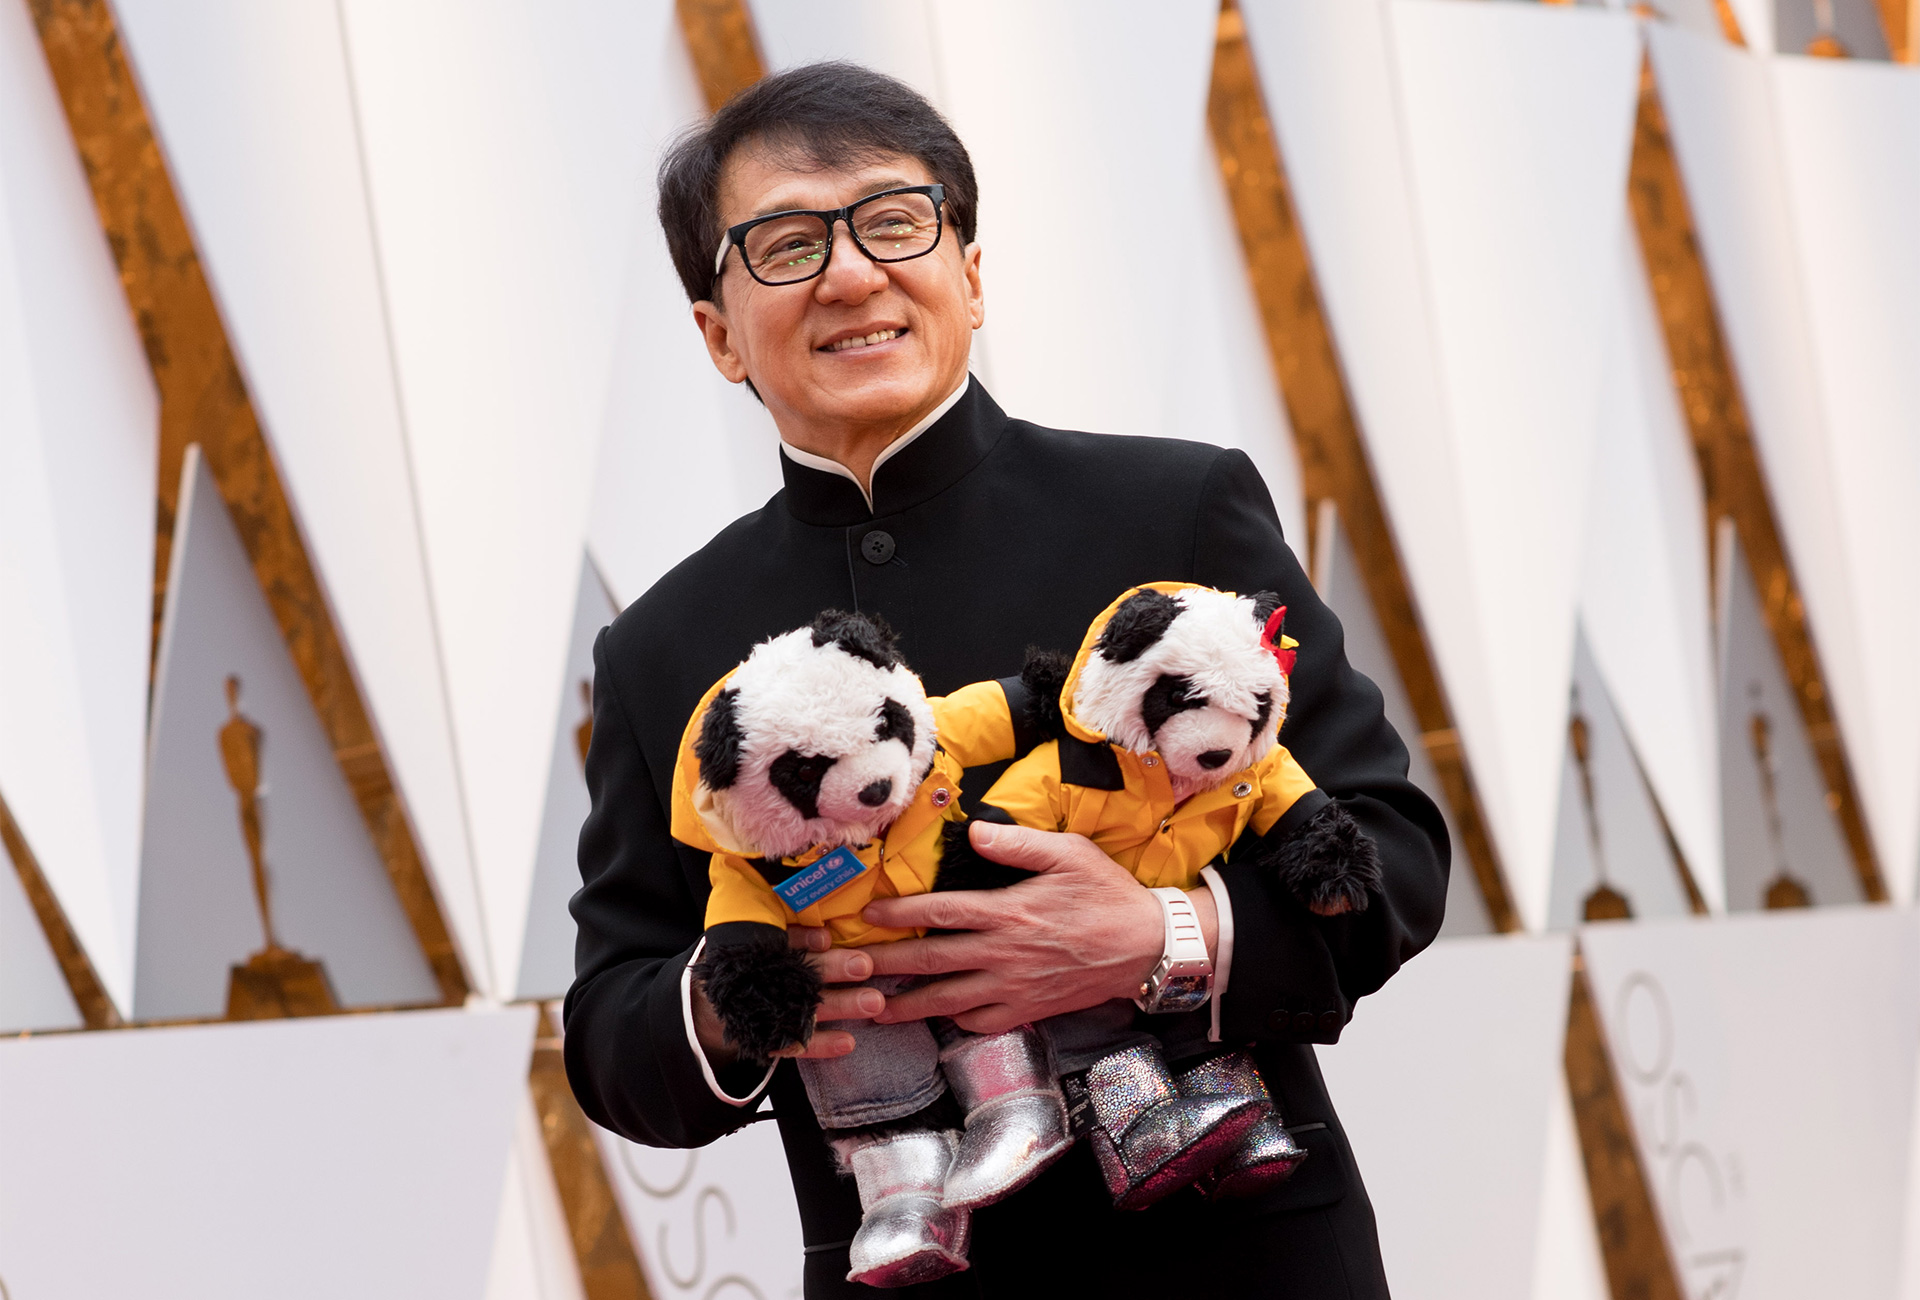 Not a fan of Jackie Chan? See 10 films to watch on YouTube that will turn you into one